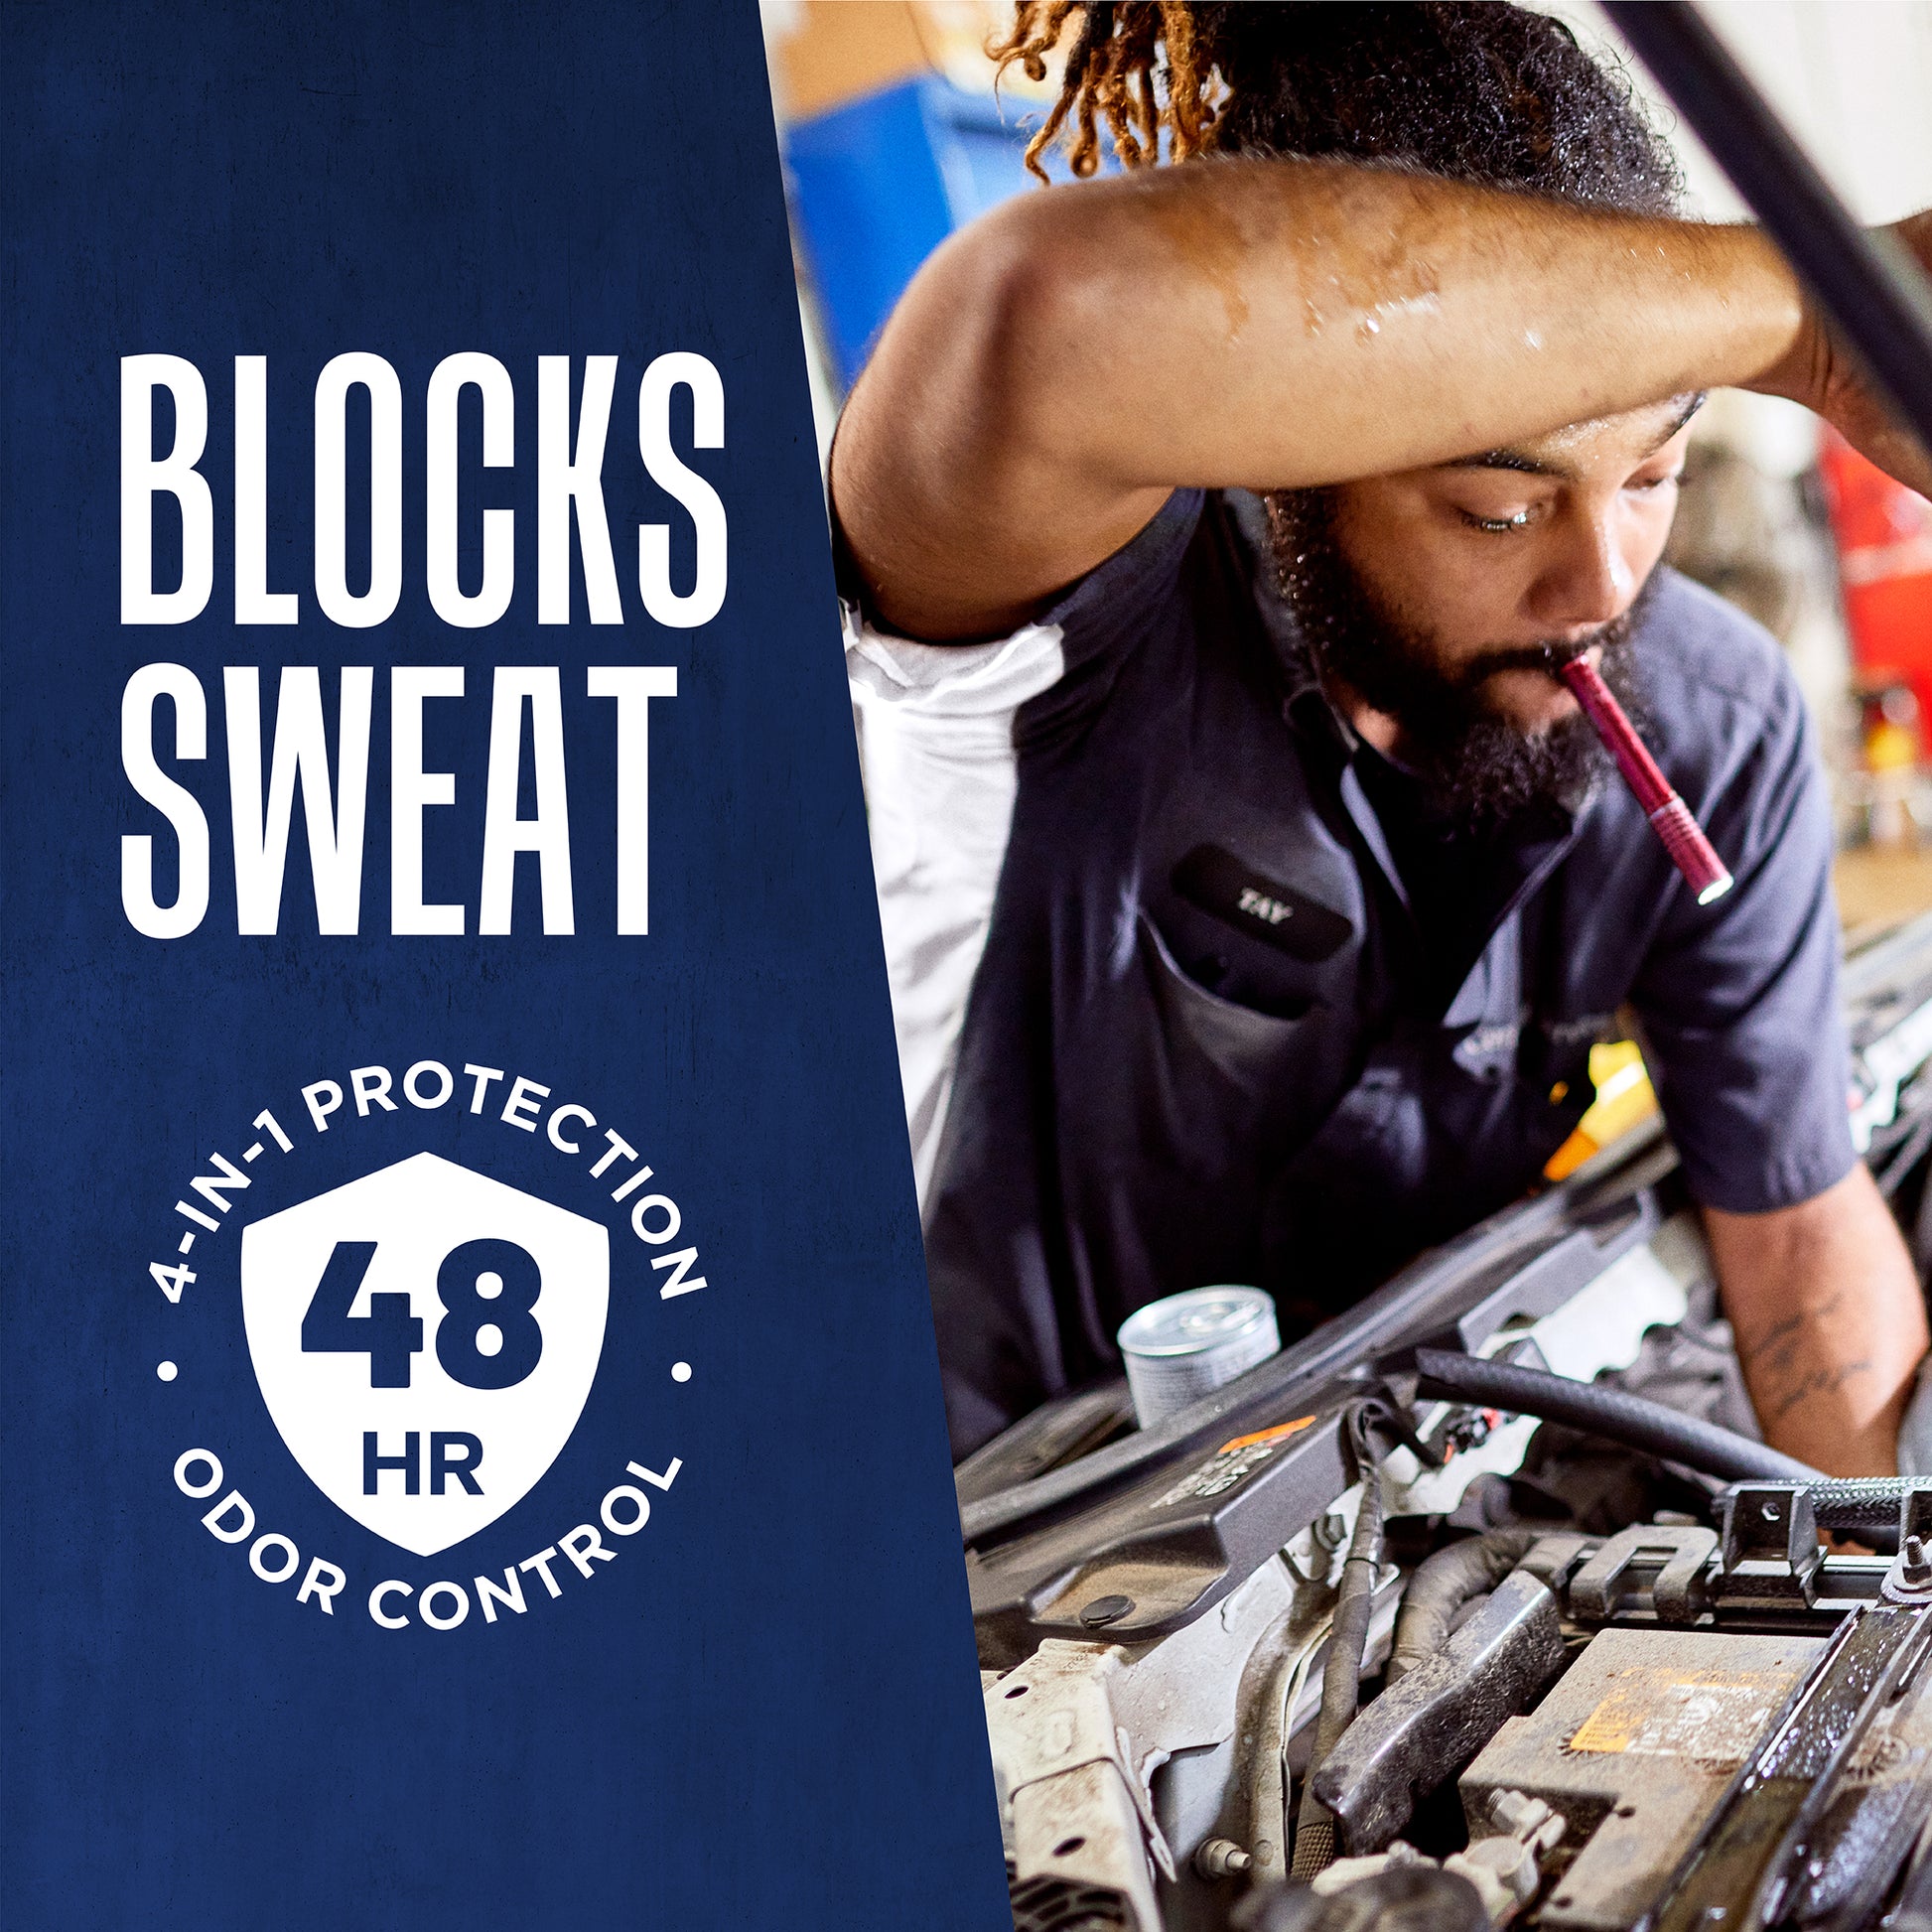 Blocks sweat 4-in-1 protection 48 hour odor control